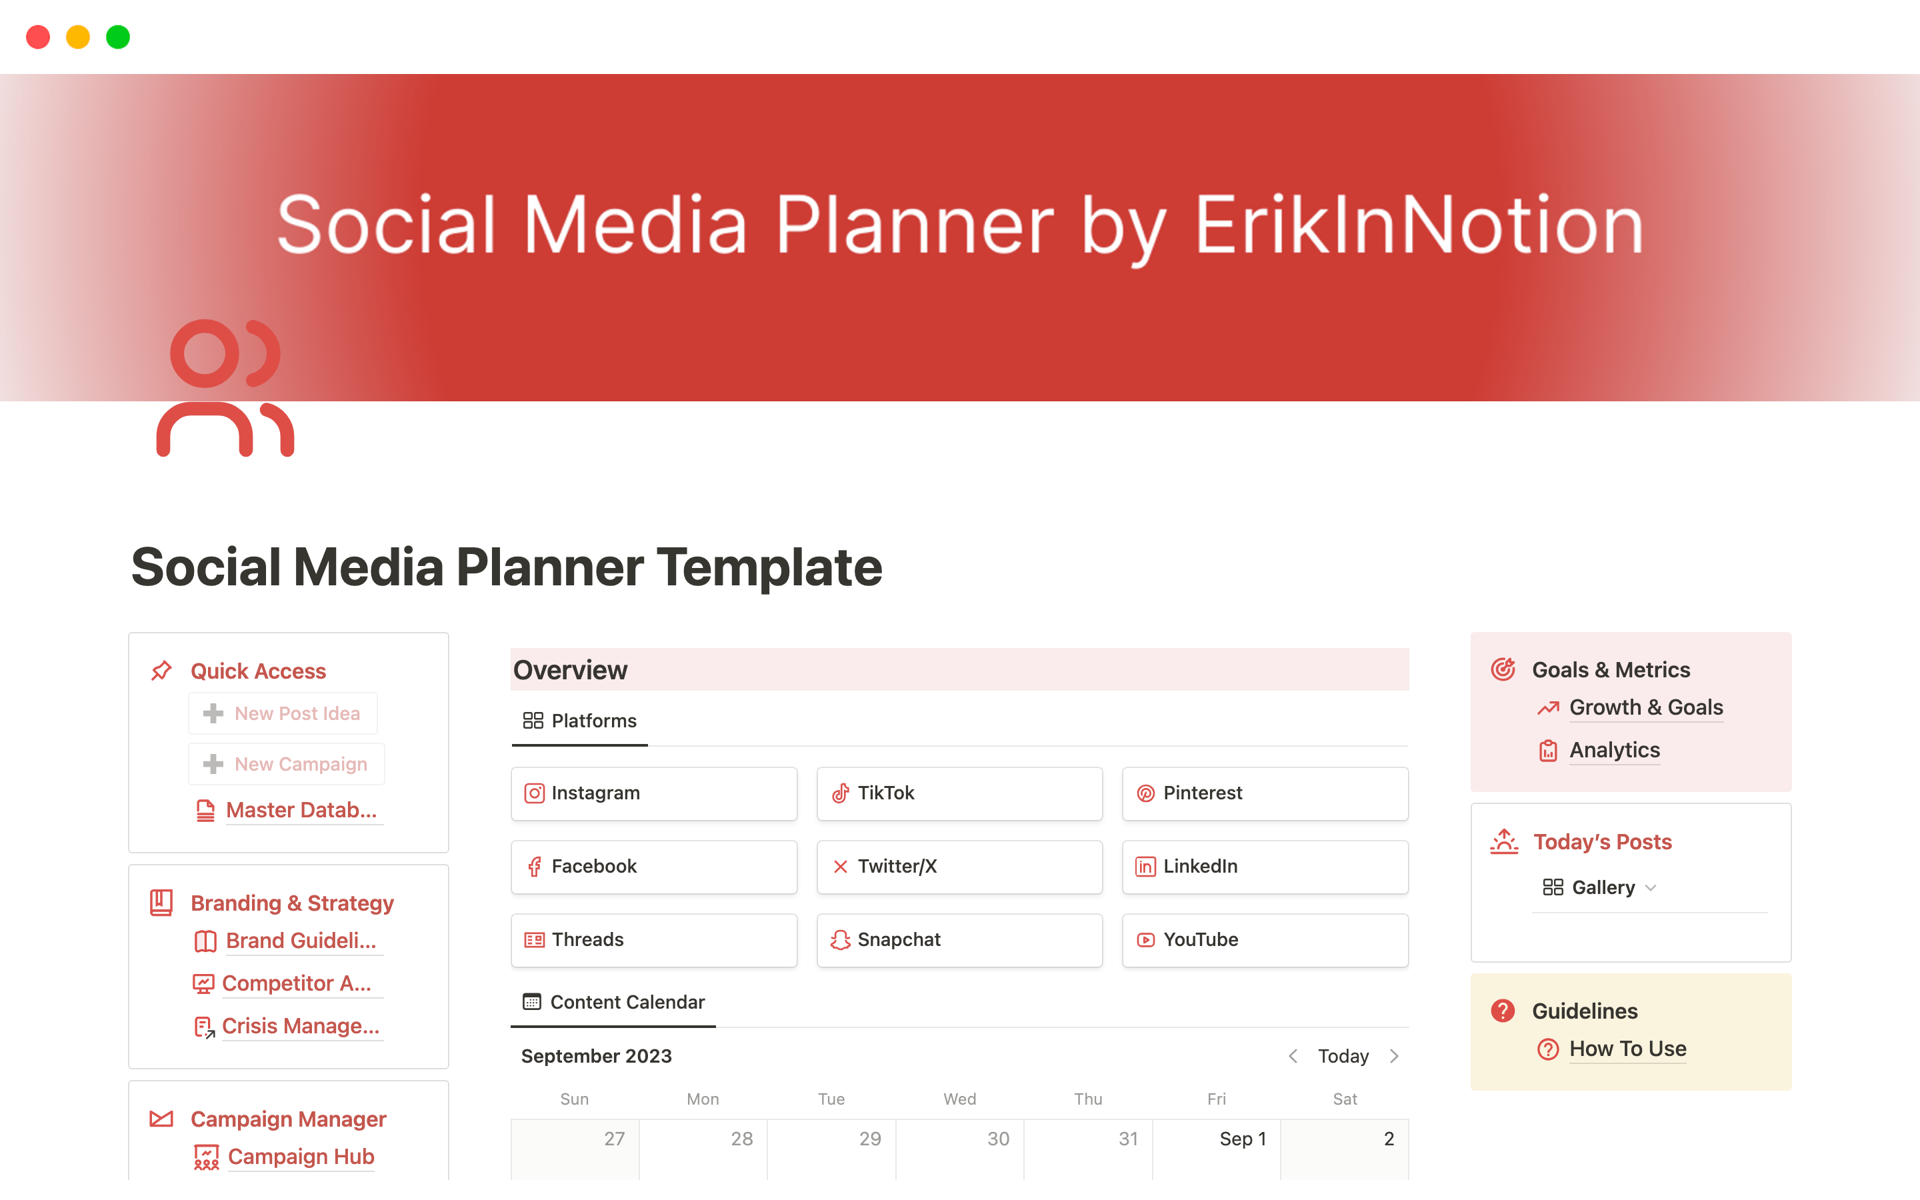 A social media planner with content planning, brand strategy, competitor analysis, campaign and collaboration tracker.